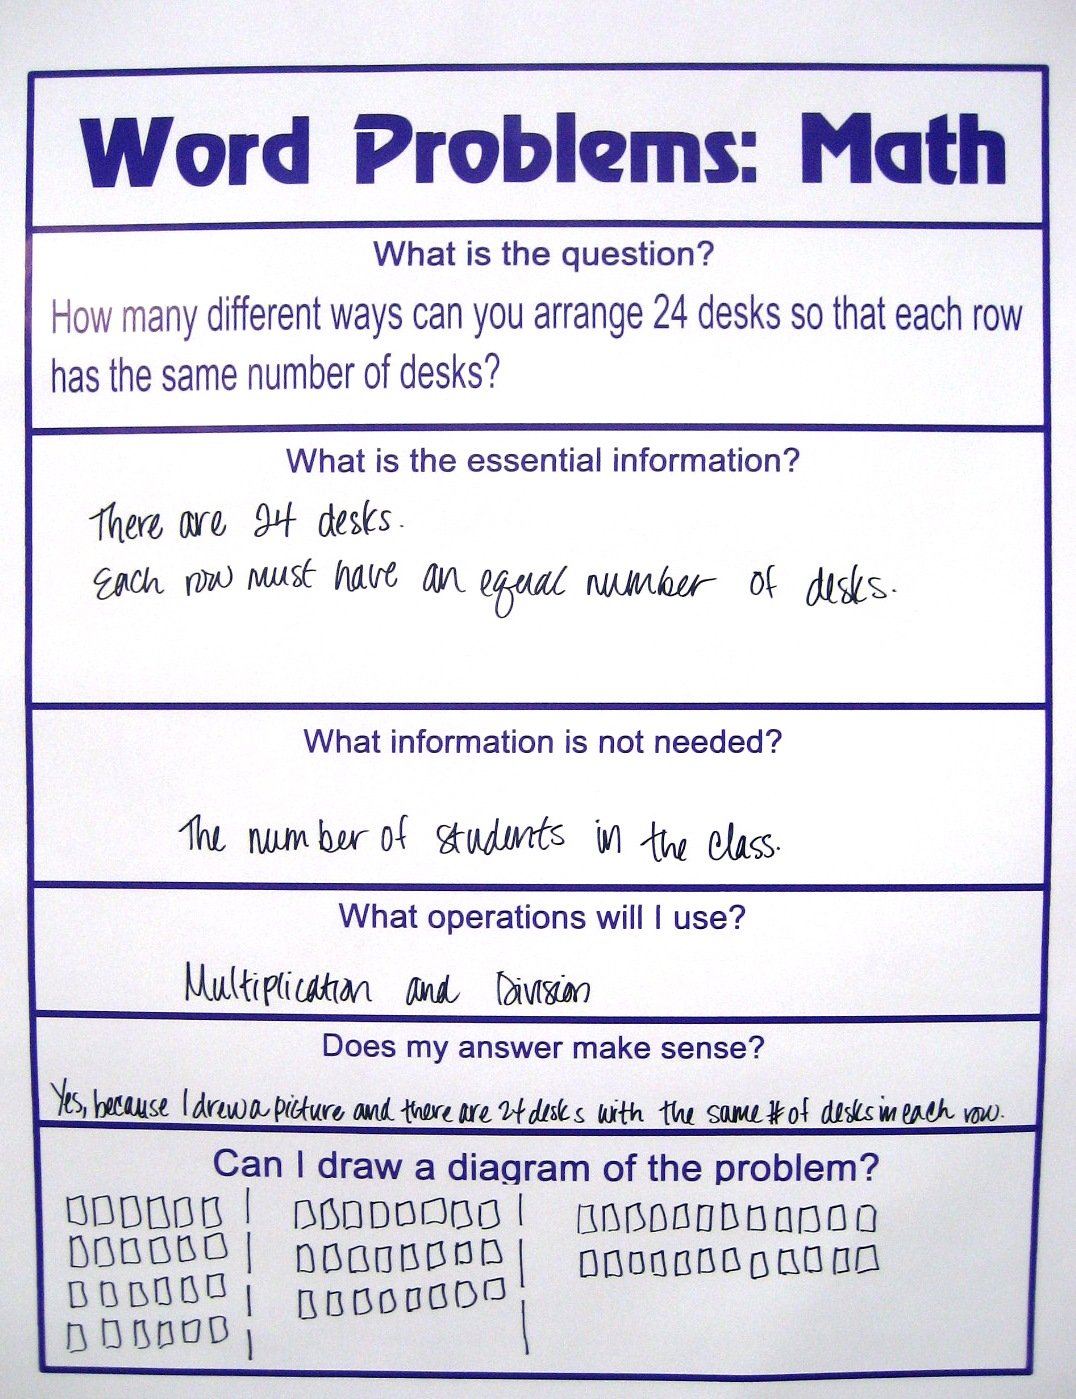 steps to solving a word problem in math